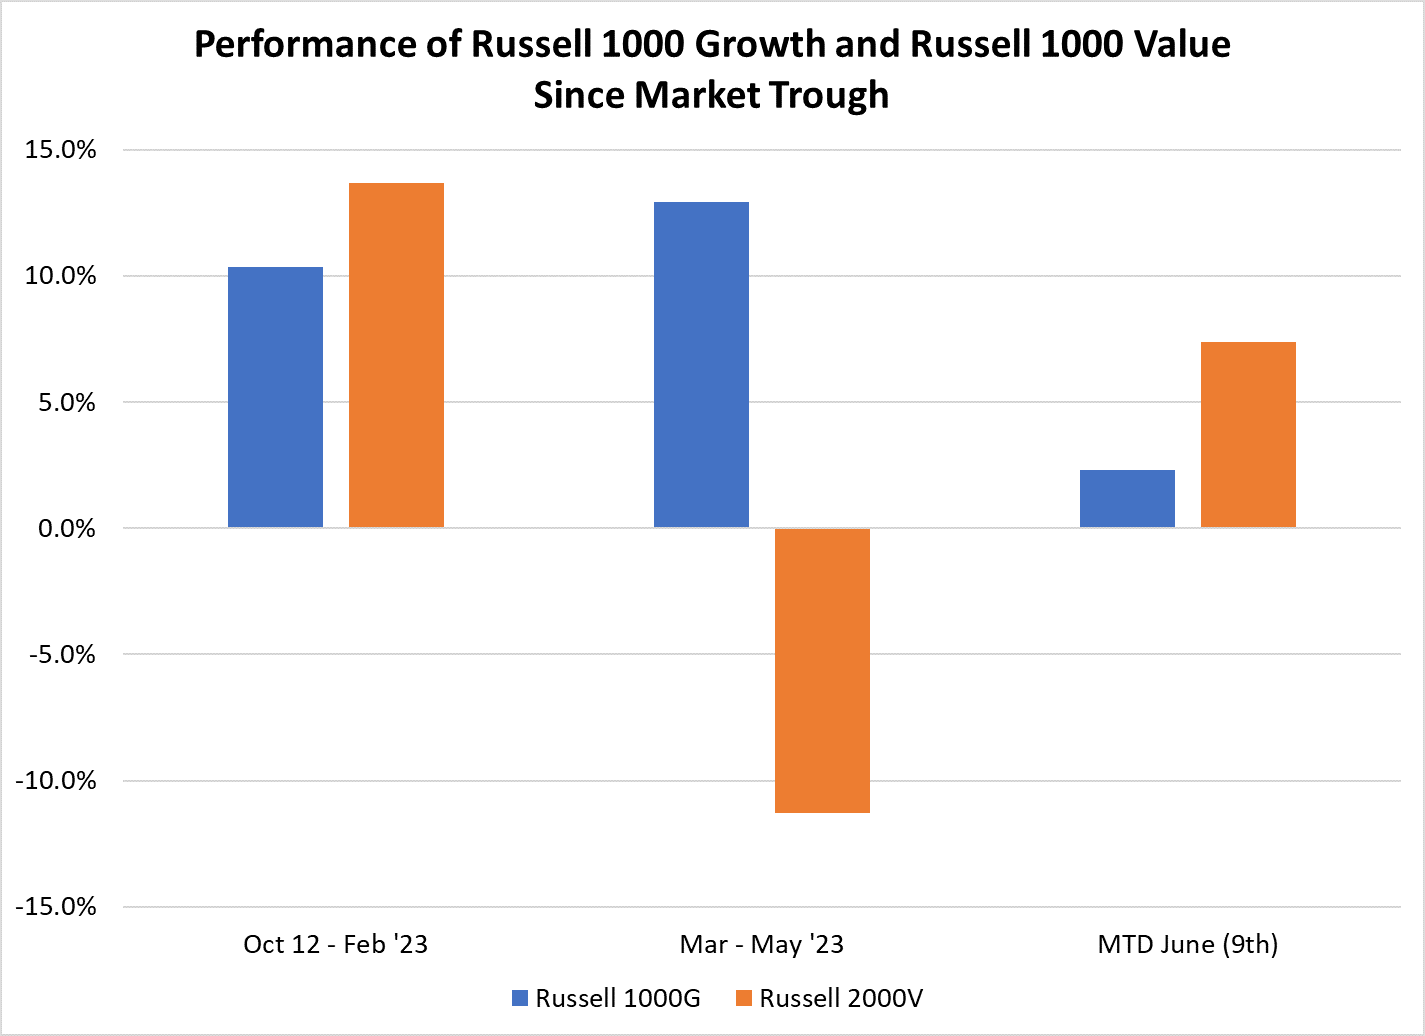 Graph showing performance of Russell 1000 market trough